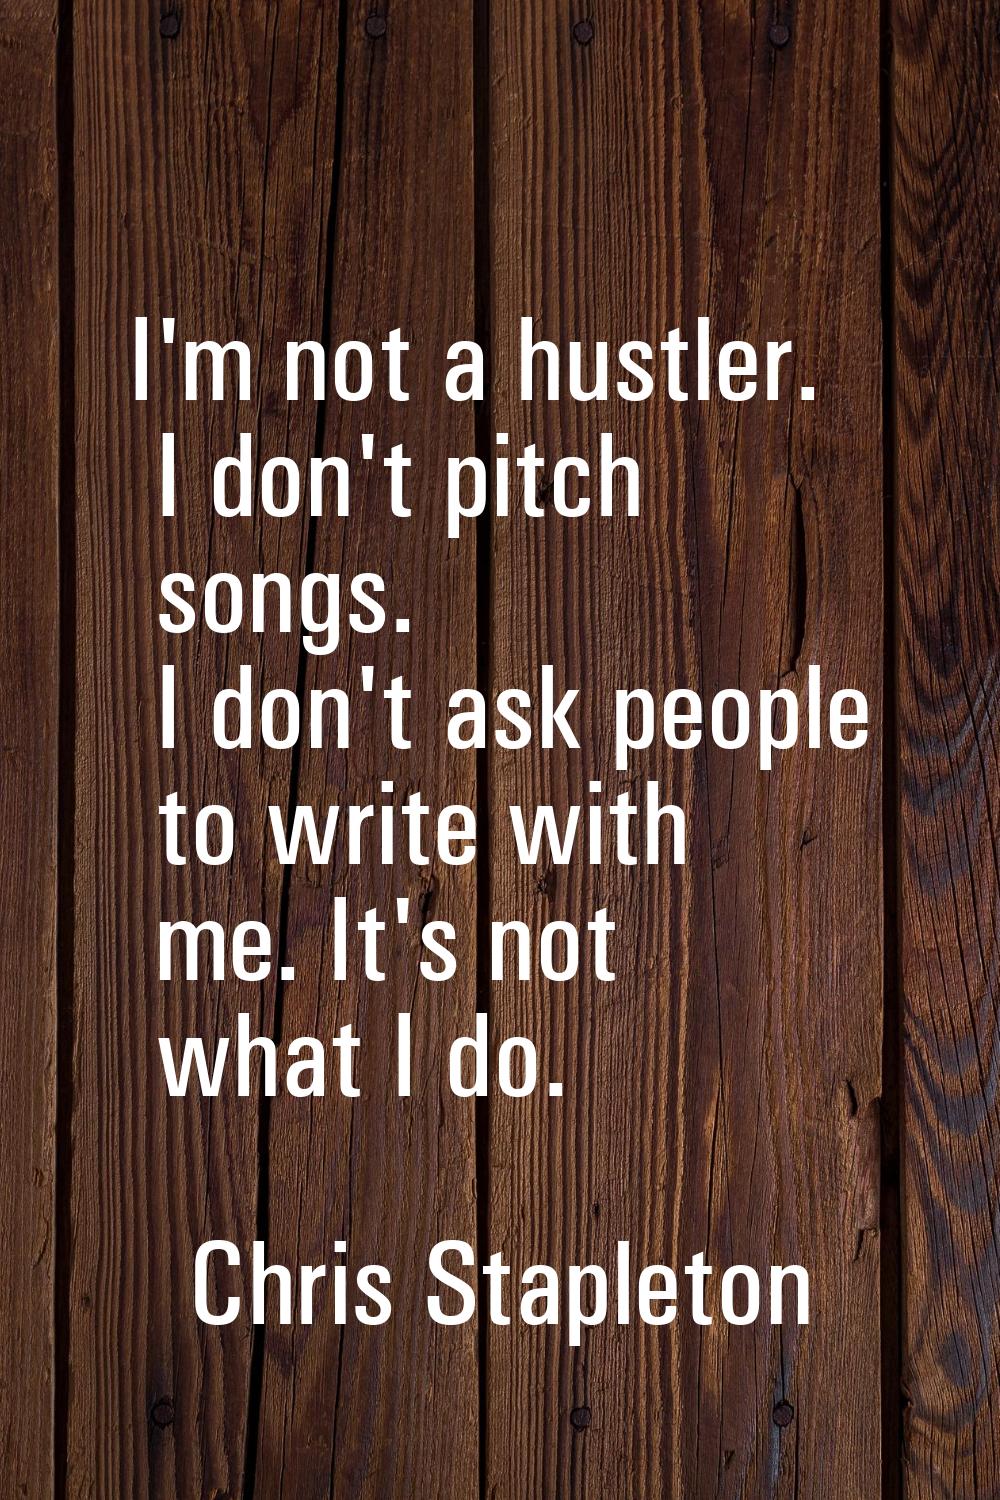 I'm not a hustler. I don't pitch songs. I don't ask people to write with me. It's not what I do.